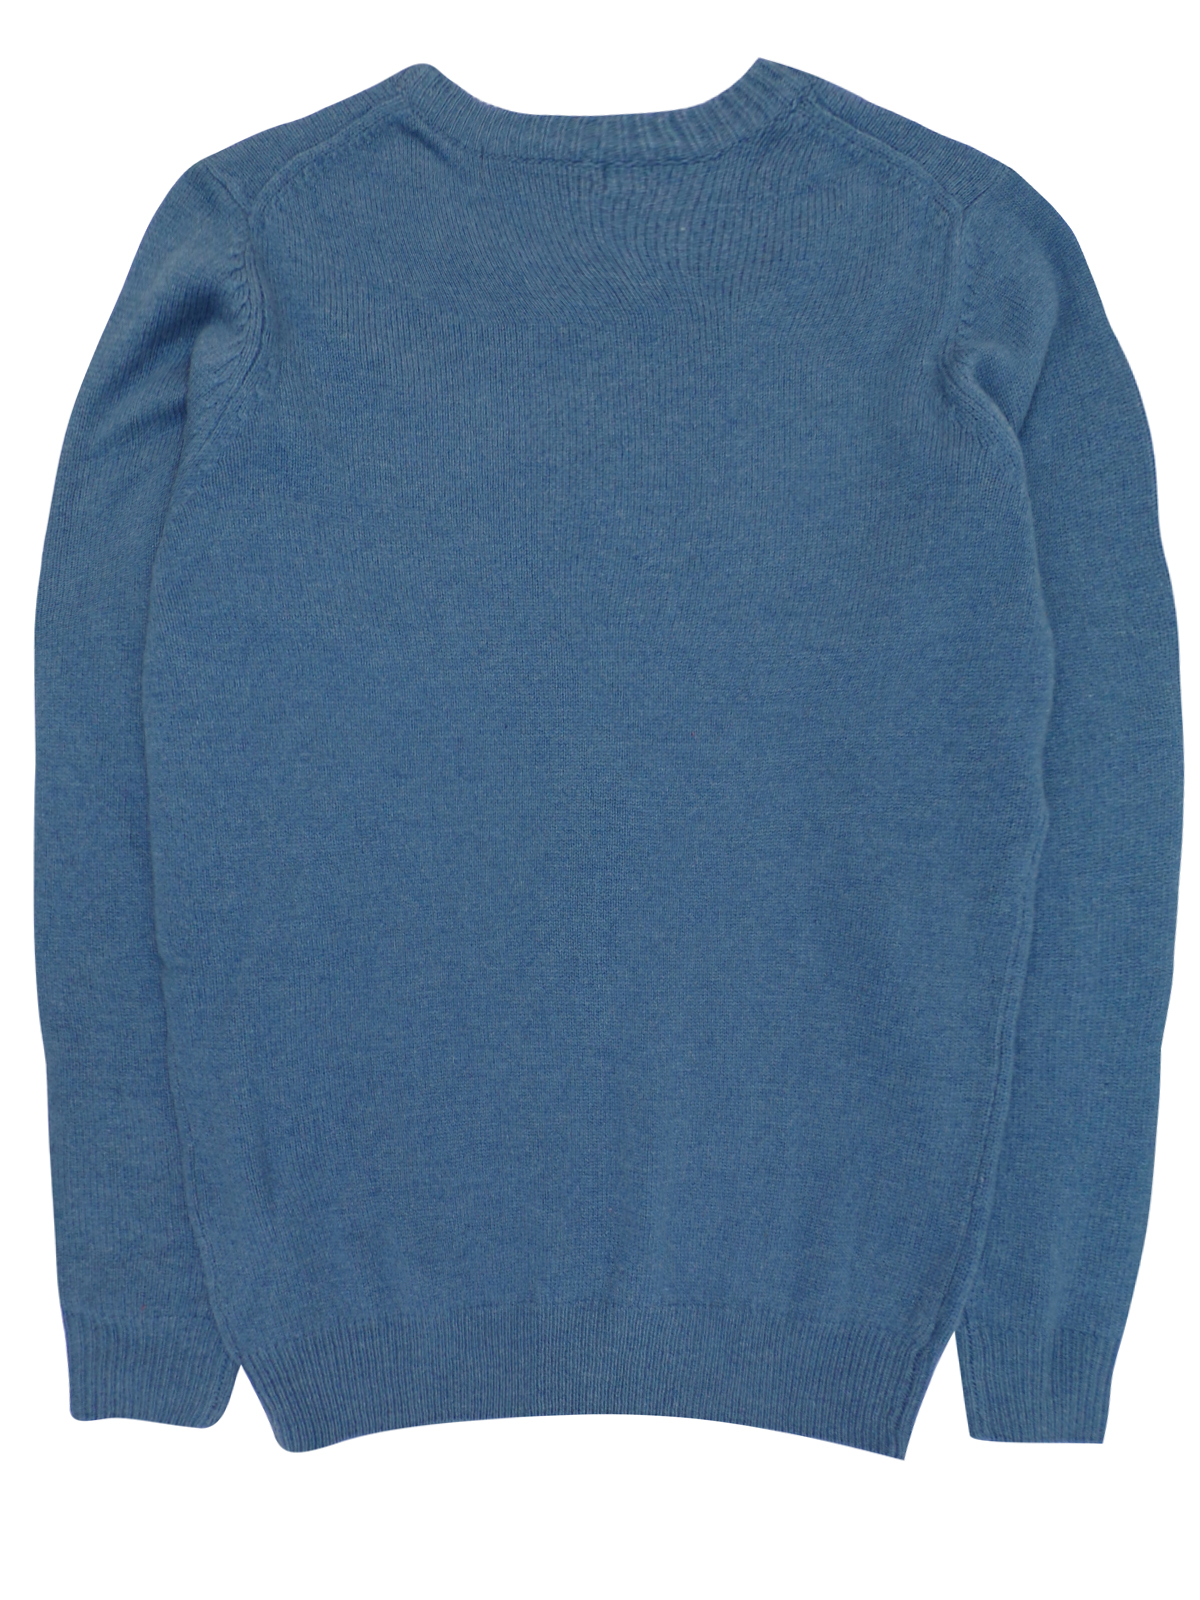 James Pringle - - James Pringle BLUE Pure Wool Crew Neck Knitted Jumper ...